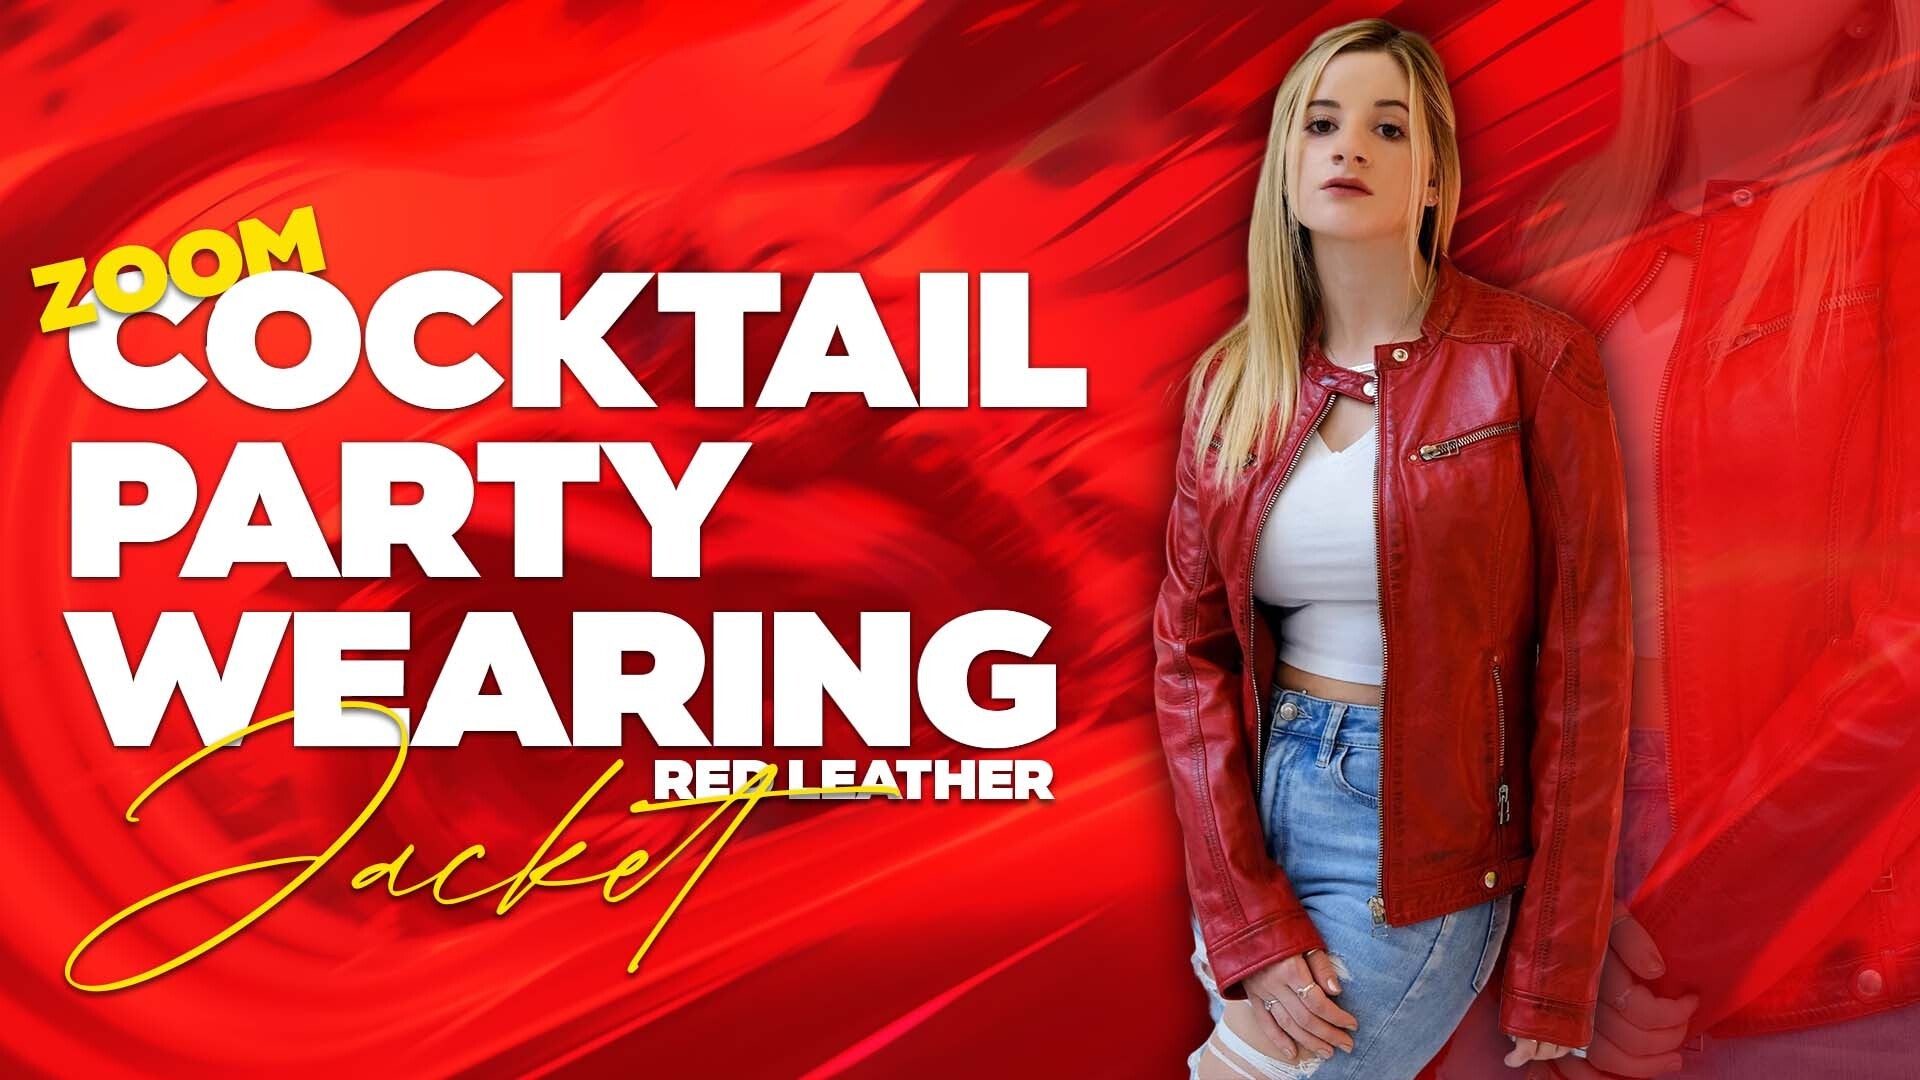 Zoom Cocktail Party Wearing Red Leather Jacket